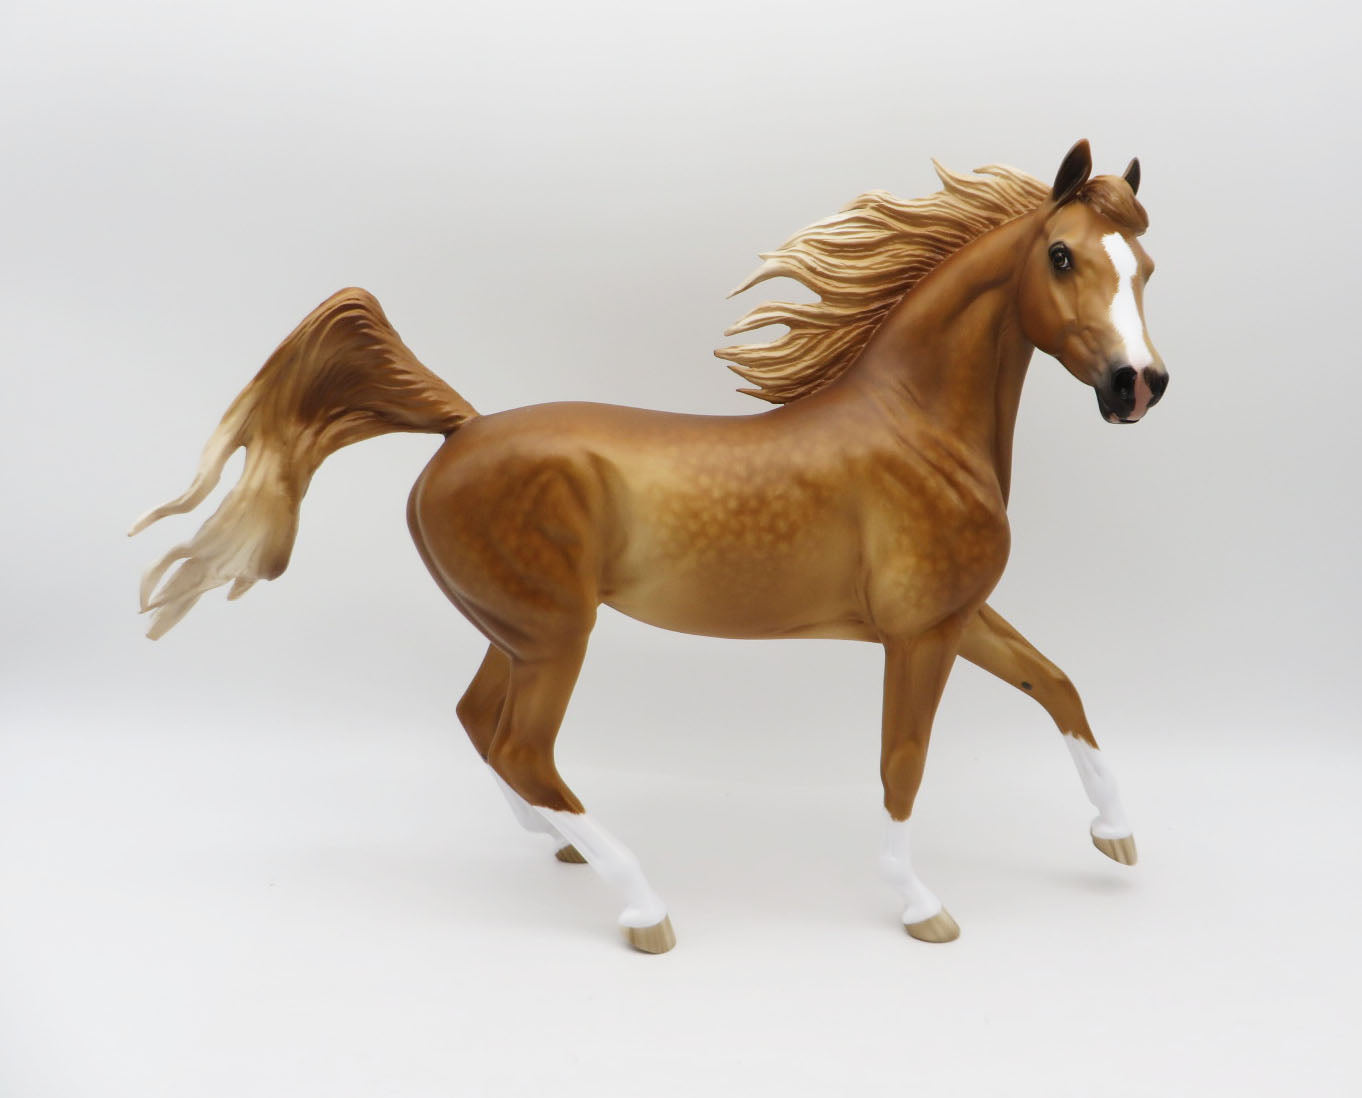 Playing with Fire - OOAK - Chestnut Arab Mare by Sheryl Leisure - Best Offers 1/30/23